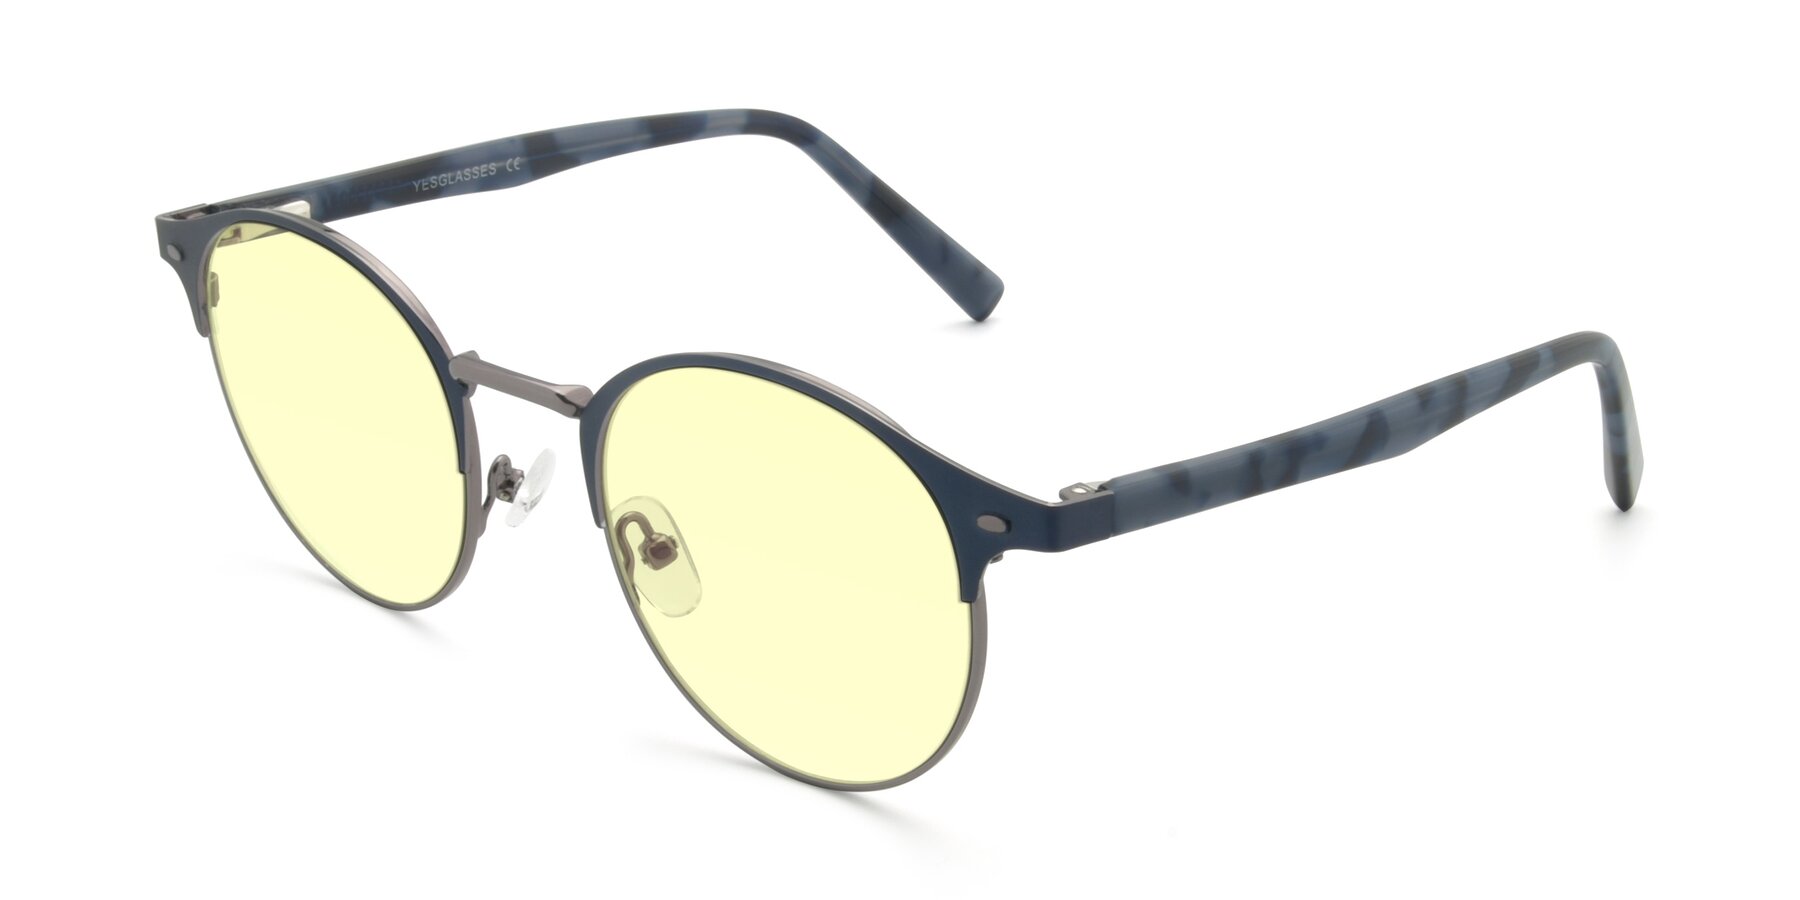 Angle of 9099 in Blue-Gunmetal with Light Yellow Tinted Lenses